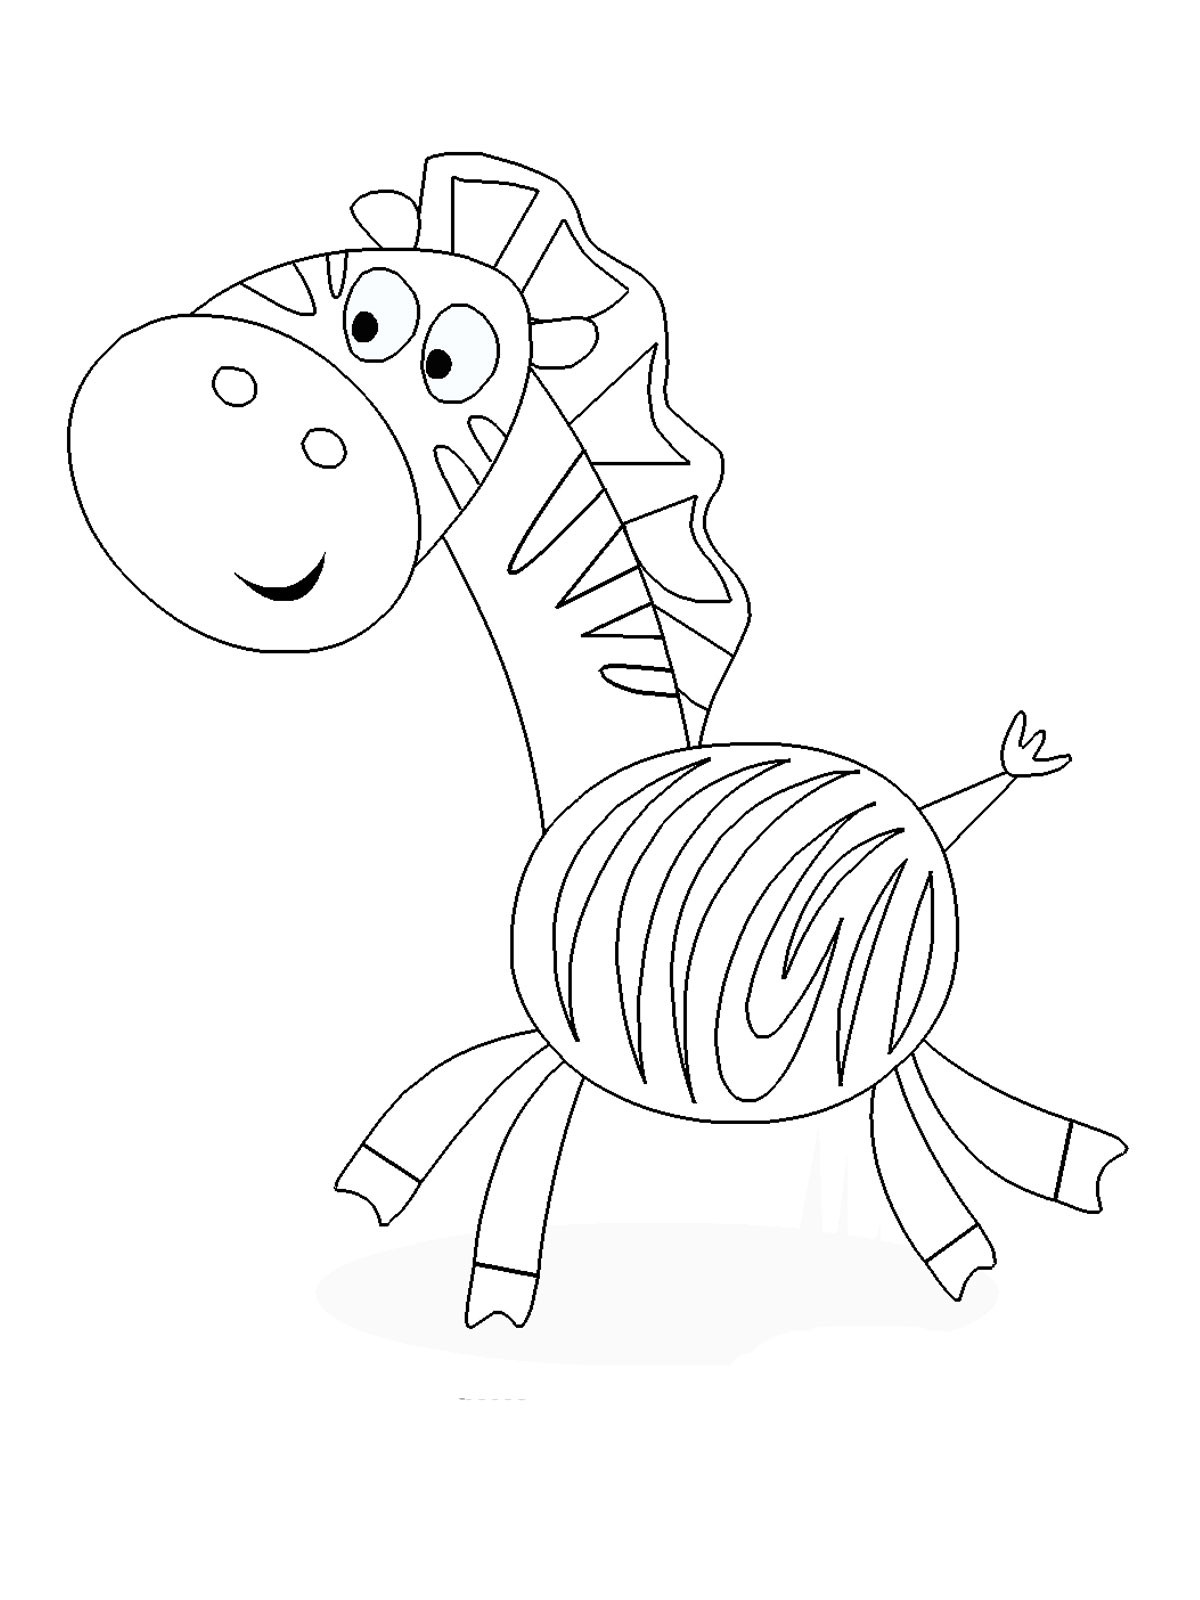 Online Coloring Kids
 Printable coloring pages for kids